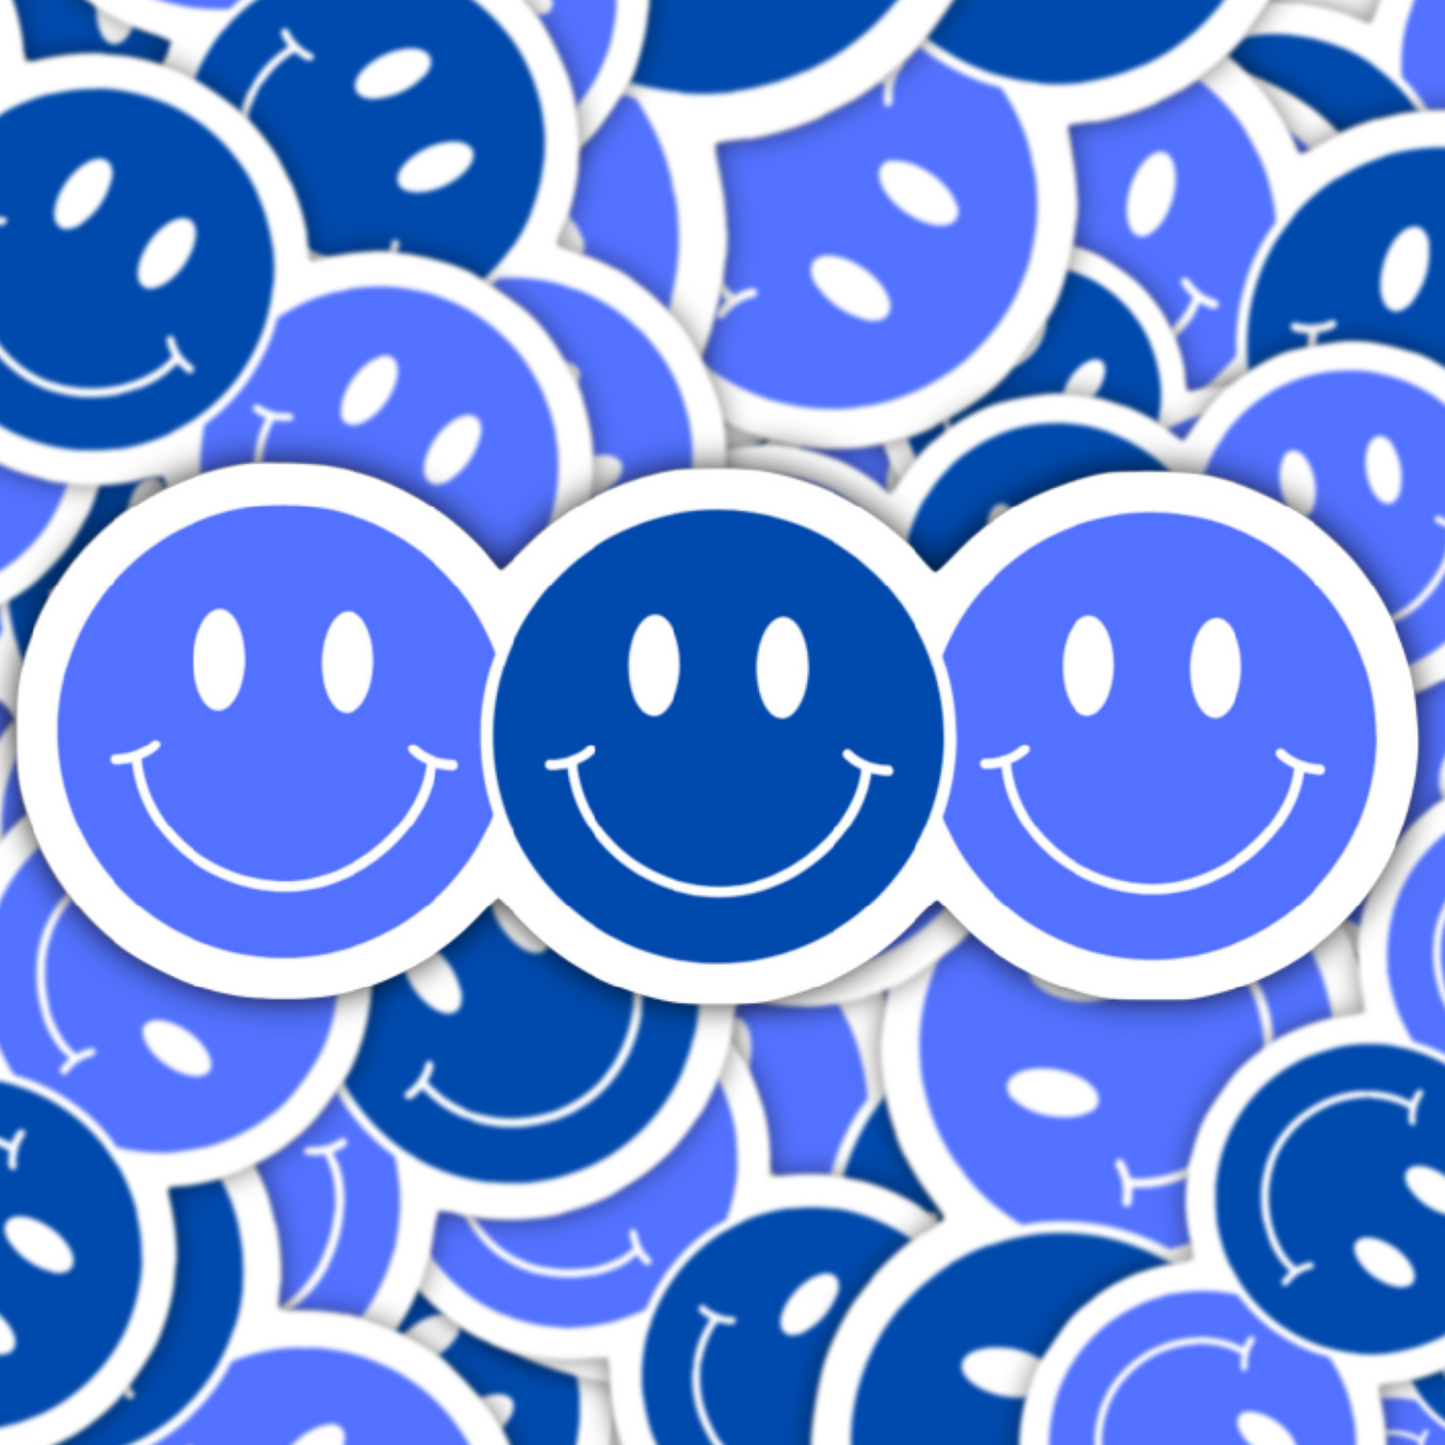 Smiling Stickers